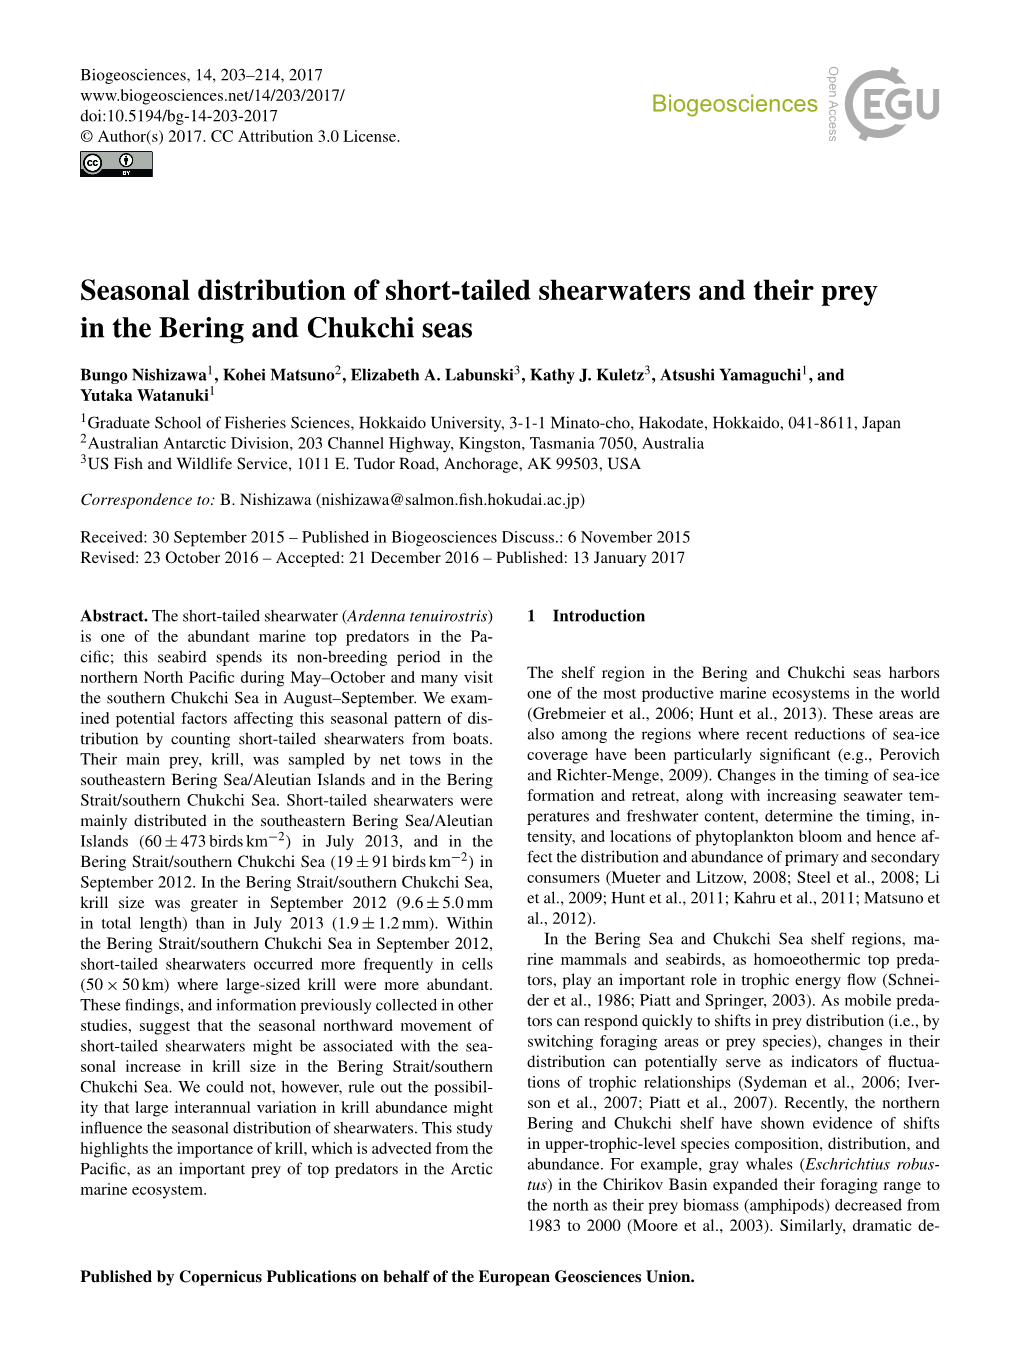 Seasonal Distribution of Short-Tailed Shearwaters and Their Prey in the Bering and Chukchi Seas